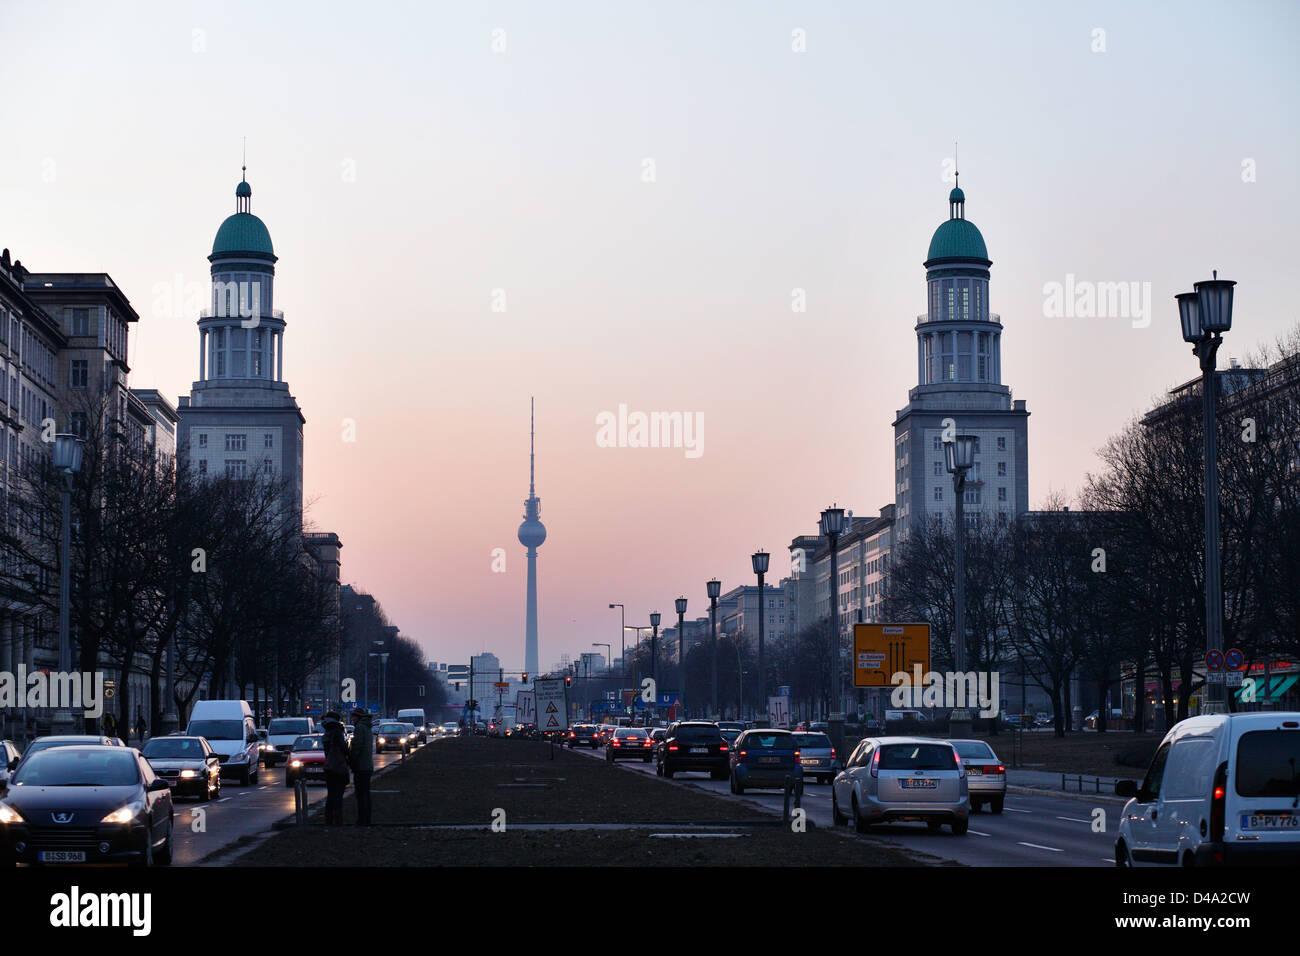 Berlin, Germany, Karl-Marx-Allee and the gatehouses at Frankfurter Tor in the evening light Stock Photo